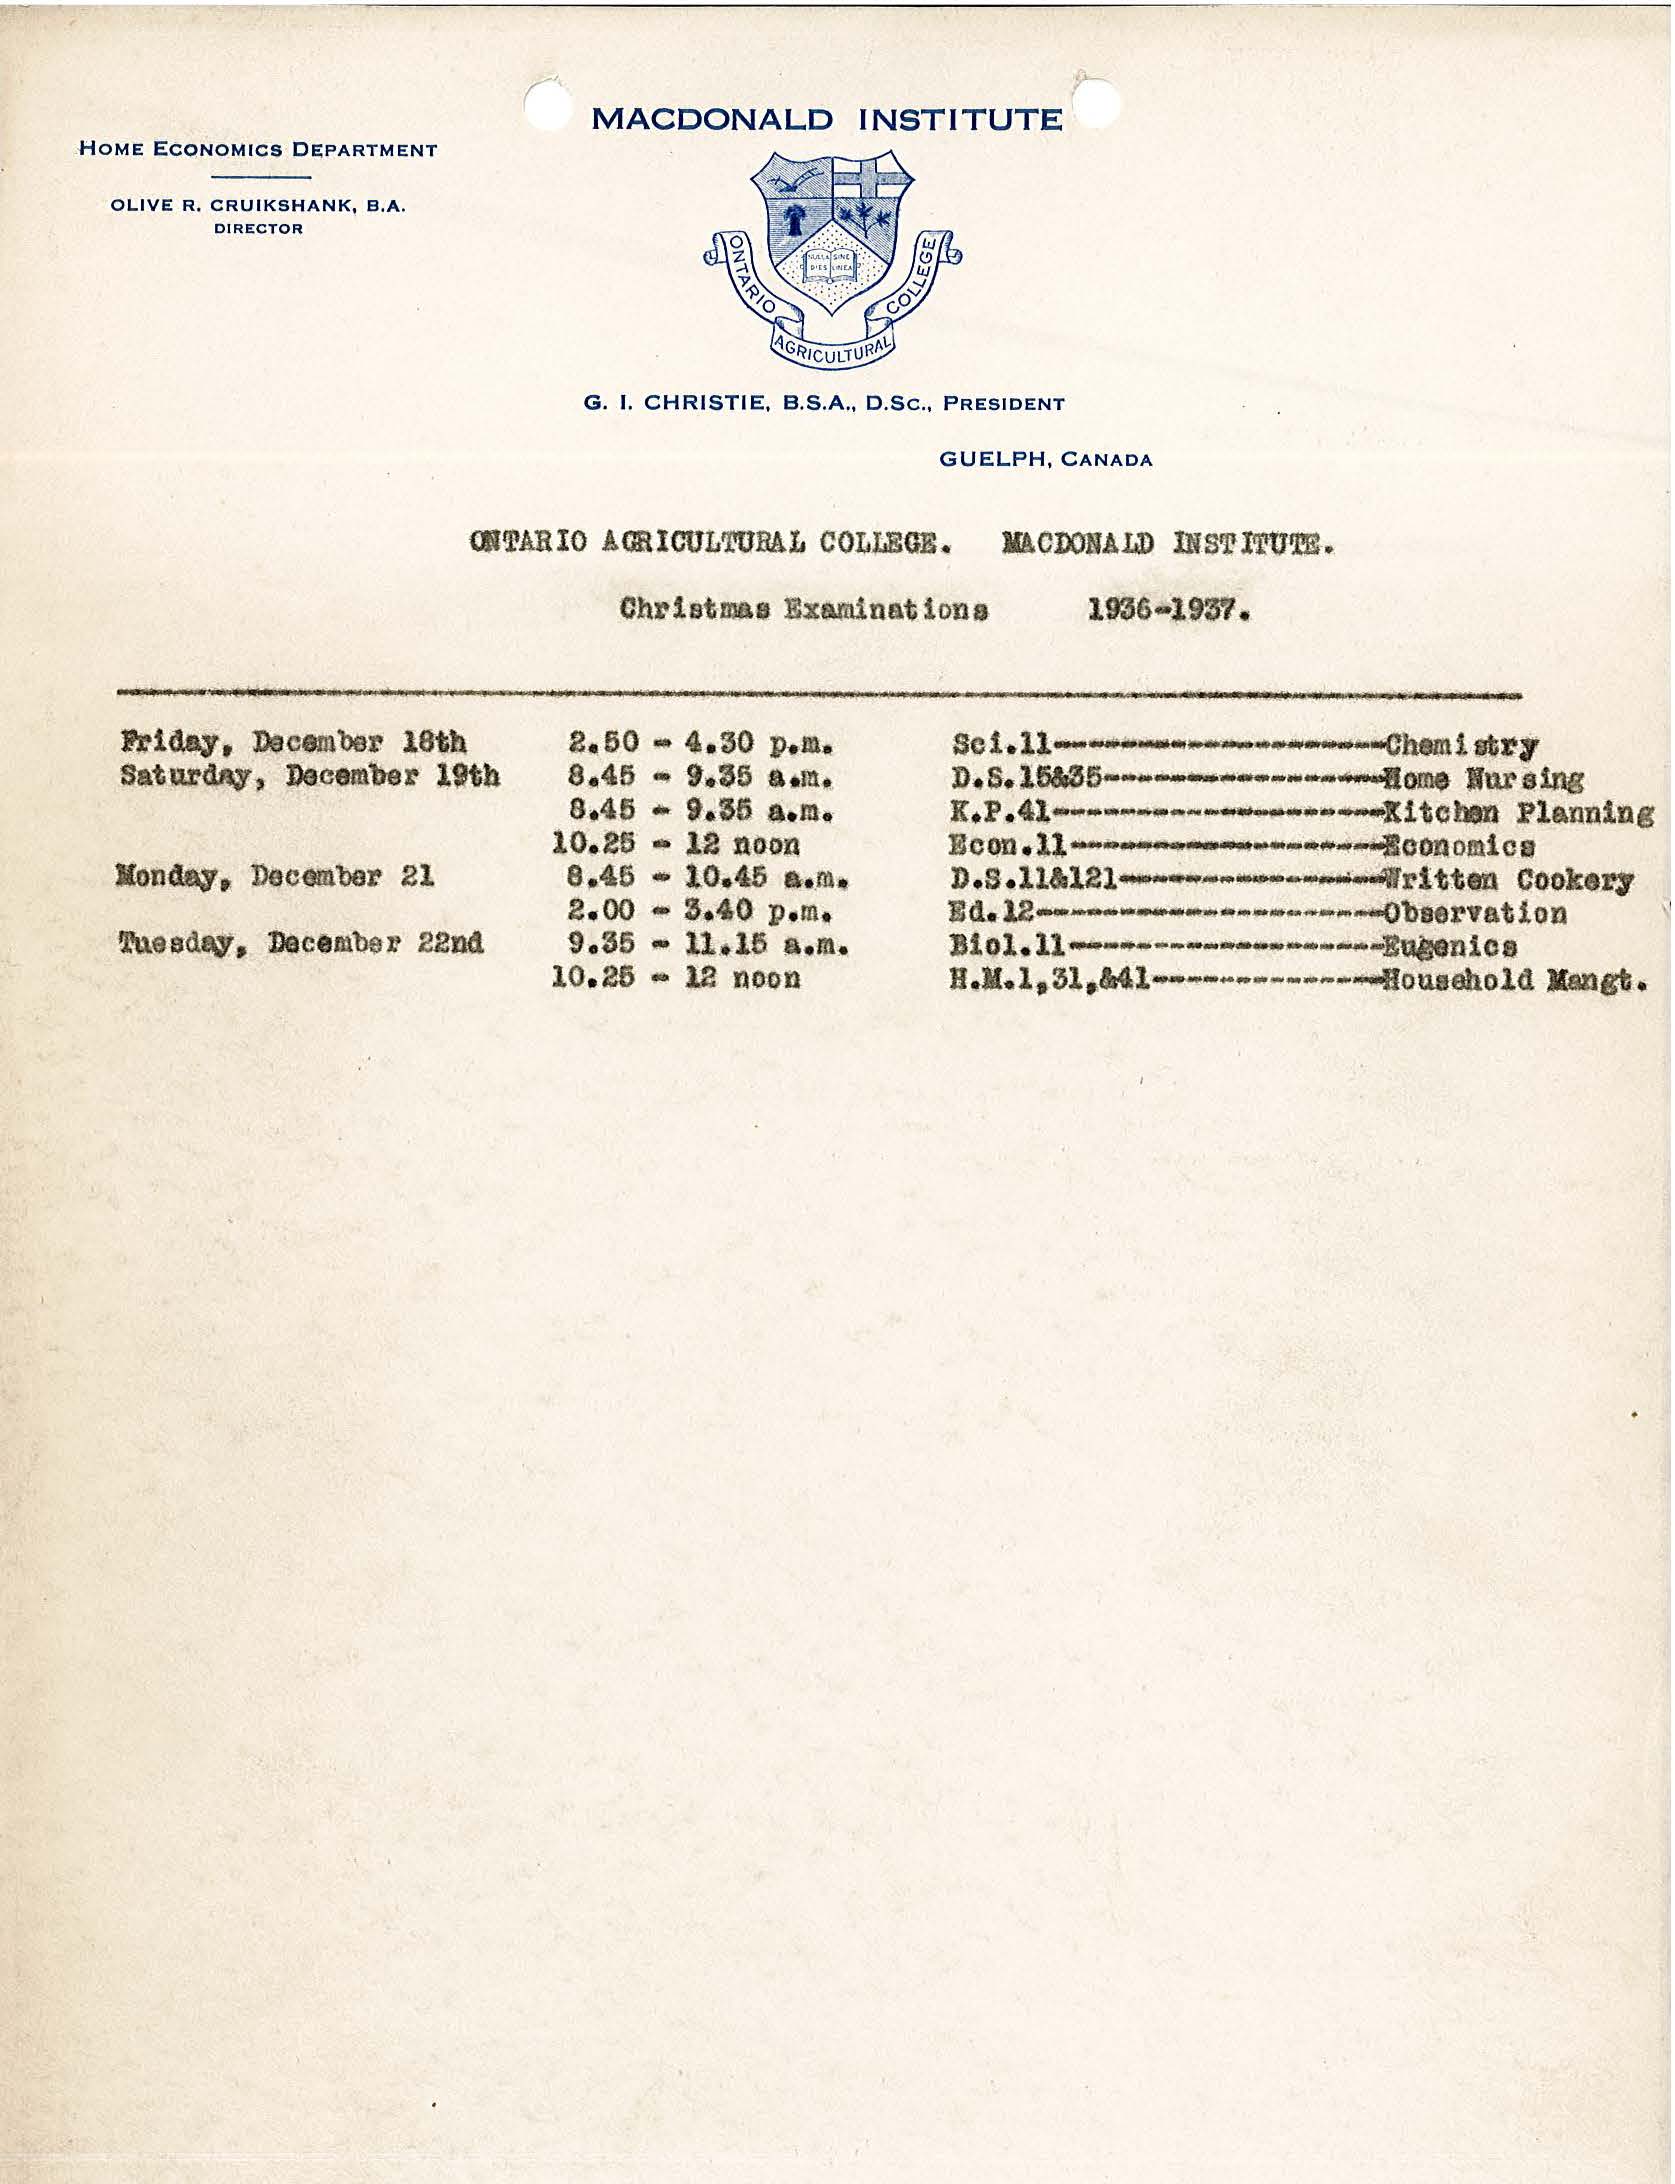 A Macdonald Institute exam timetable from 1936-1937. Eugenics is one of the course exams listed.